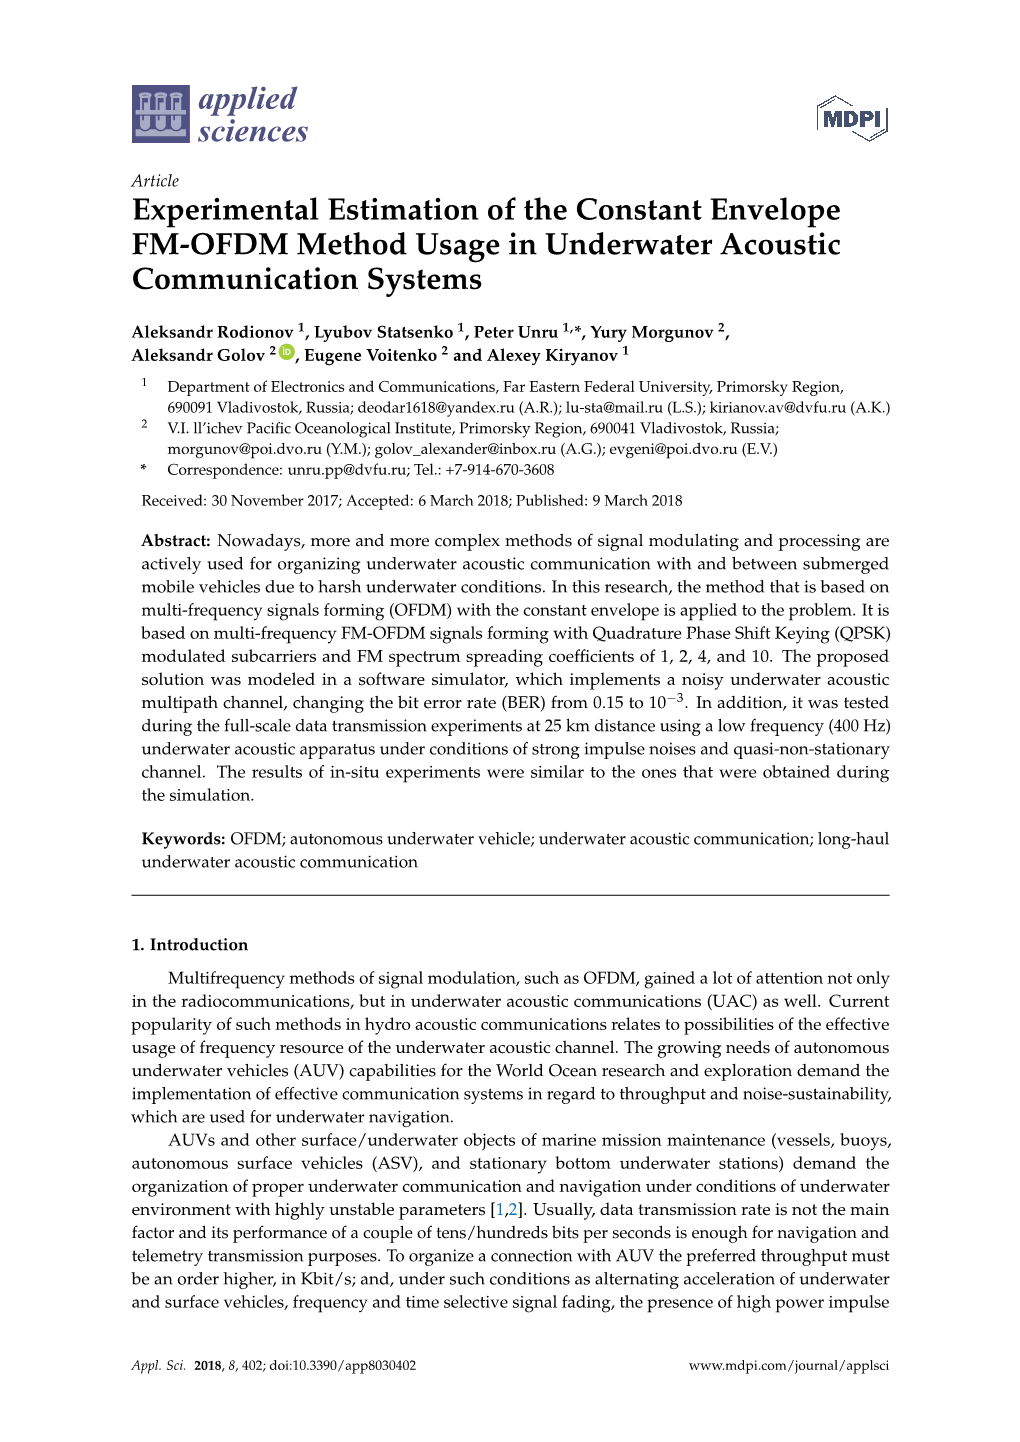 Experimental Estimation of the Constant Envelope FM-OFDM Method Usage in Underwater Acoustic Communication Systems